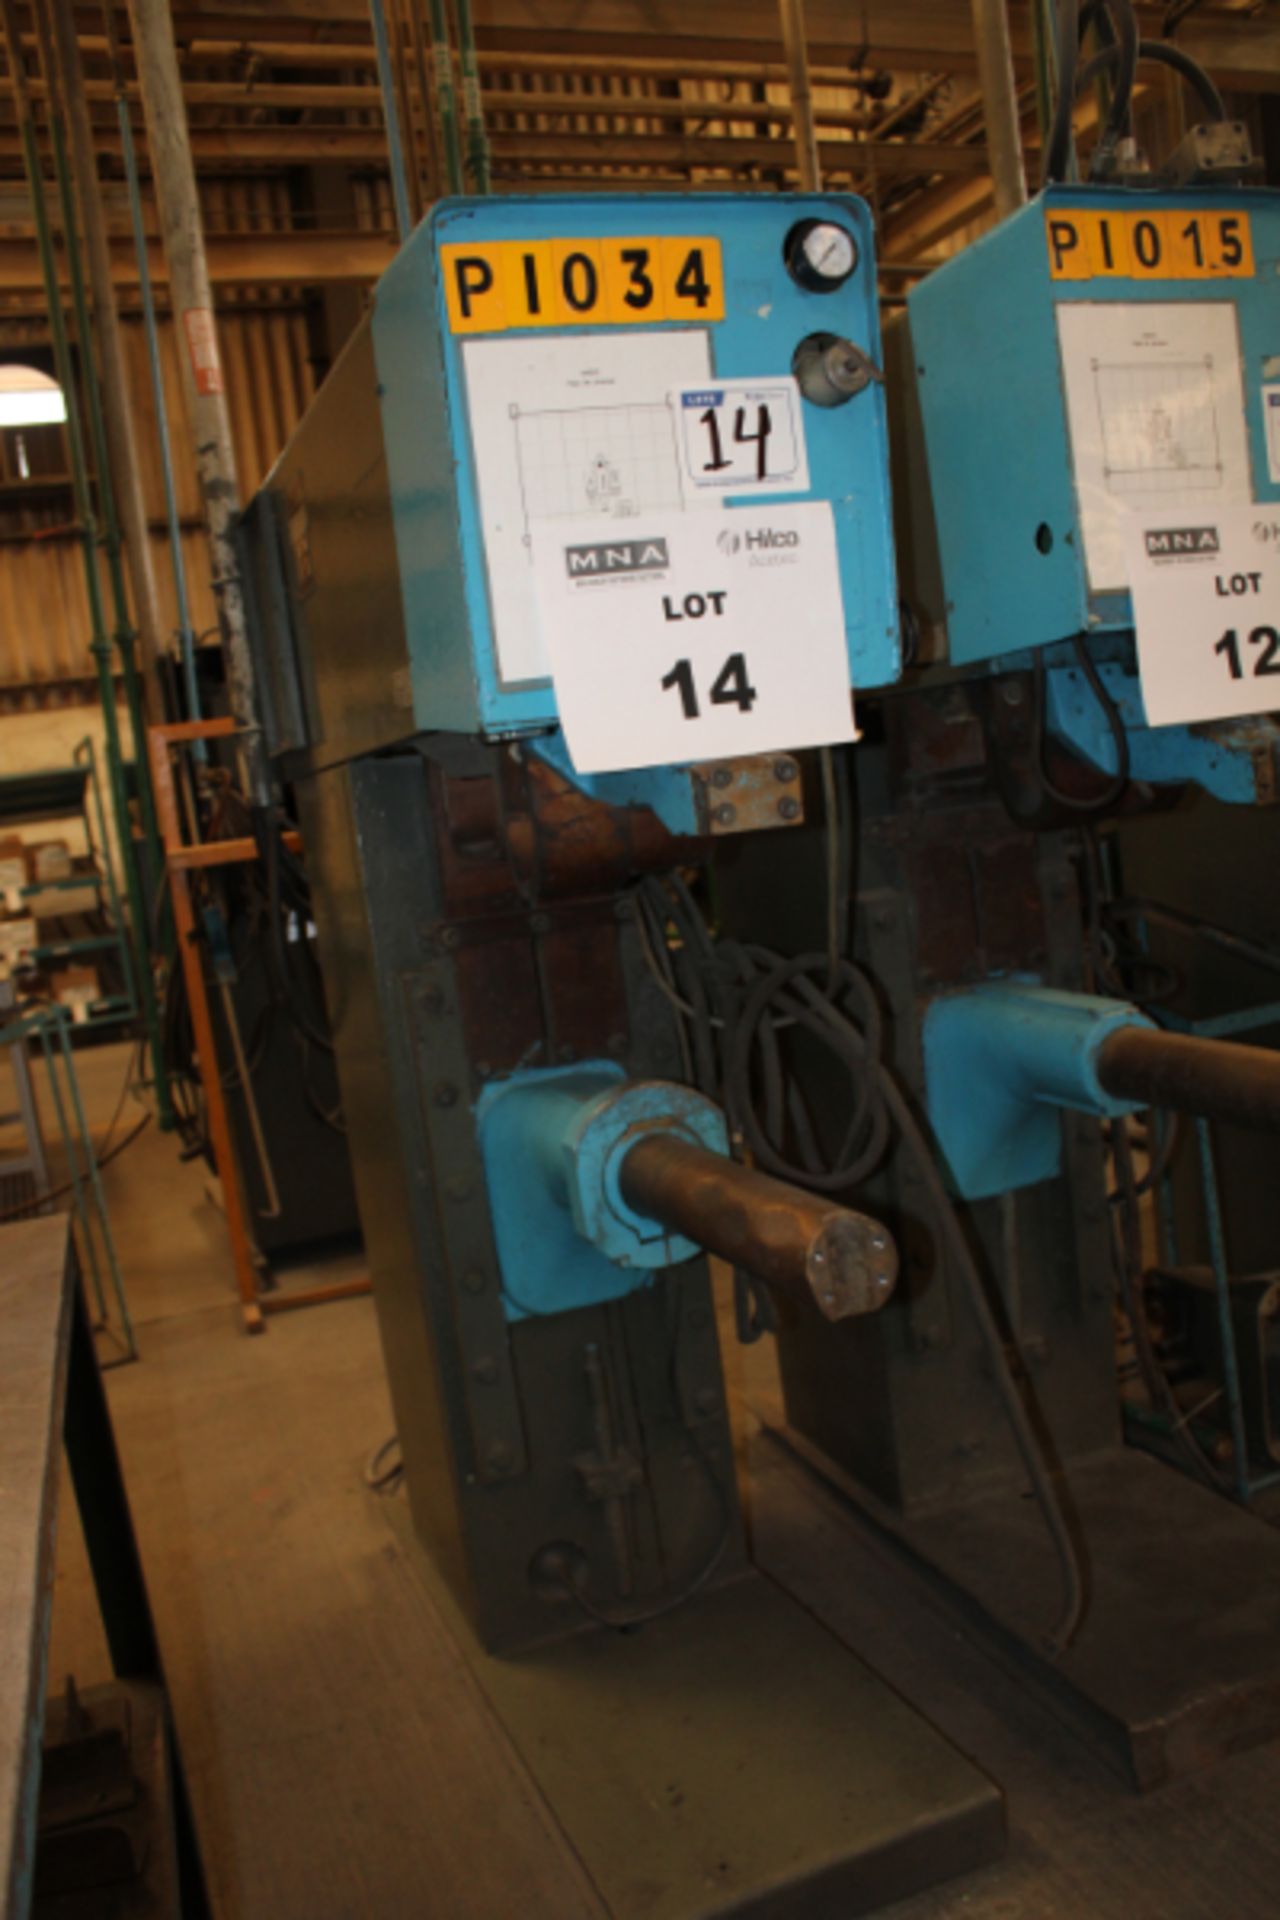 100 KVA Messer Griesheim UP100E Spot Welder, MPS1043 Control, Harms Wende System, New 1983 - Image 2 of 6